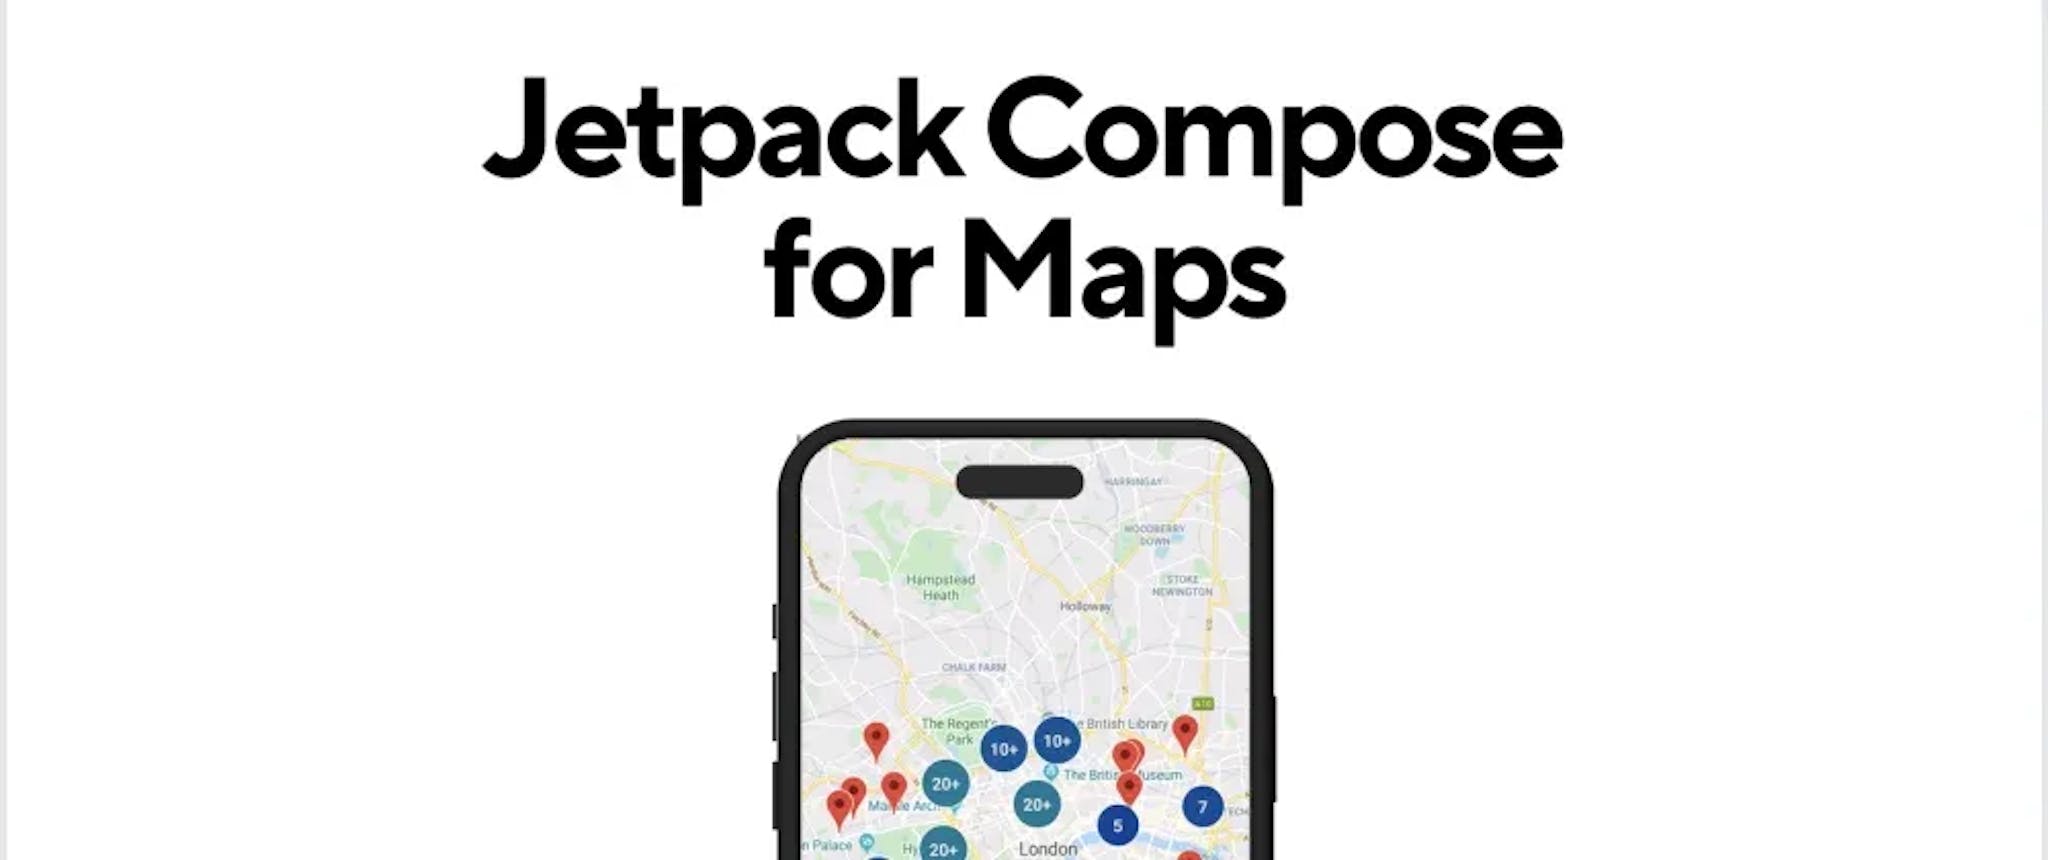 featured image - 使用 Jetpack Compose 改造移动地图：Google I/O 开发者大会上的见解